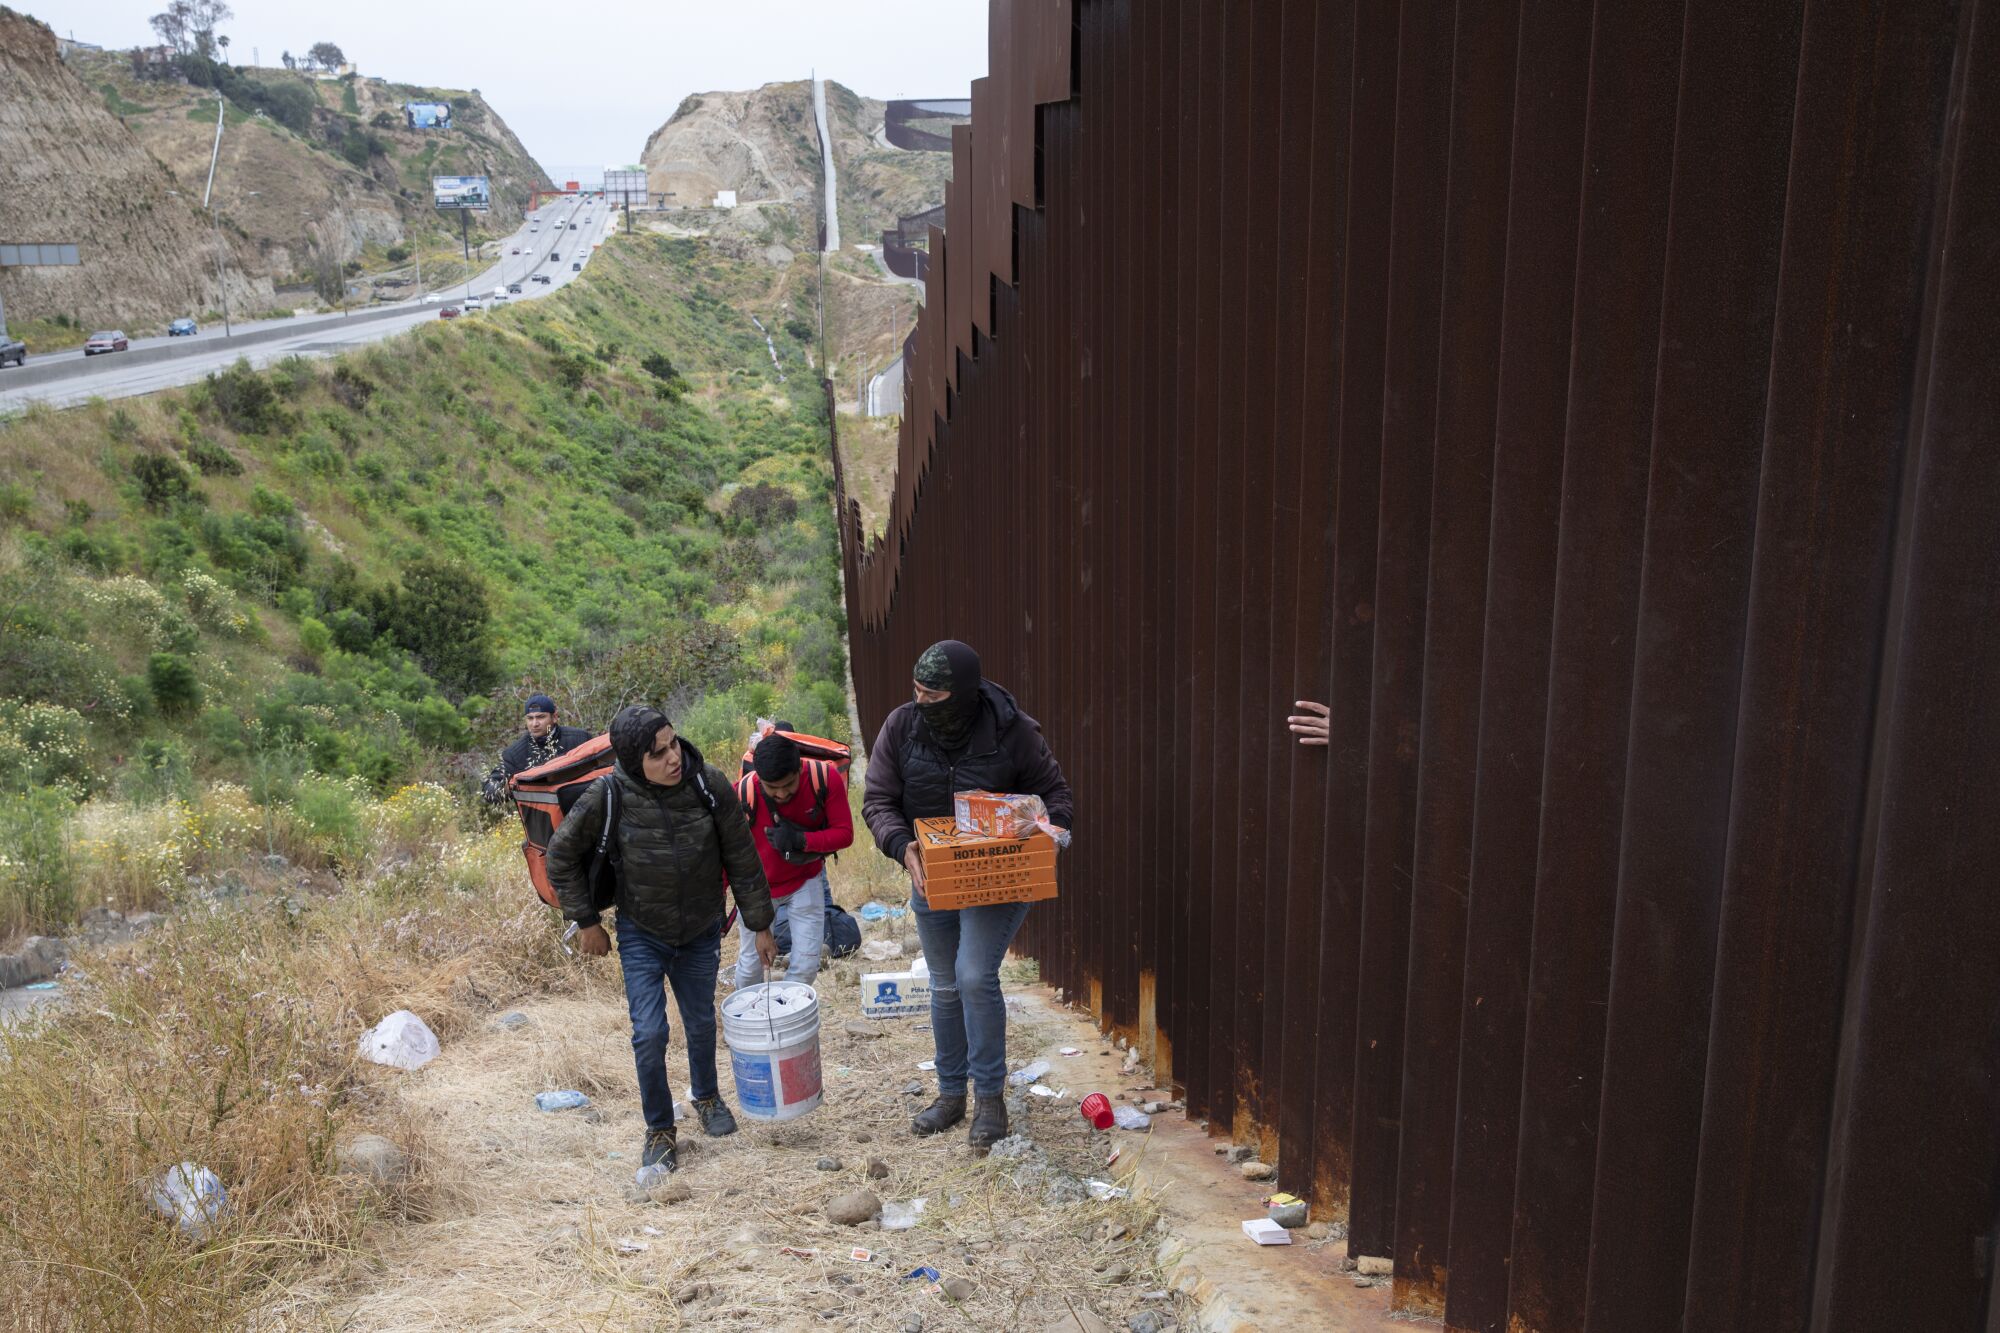 People delivering food walk a steep hill where a group of about 500-800 men traveling wait between the border walls.